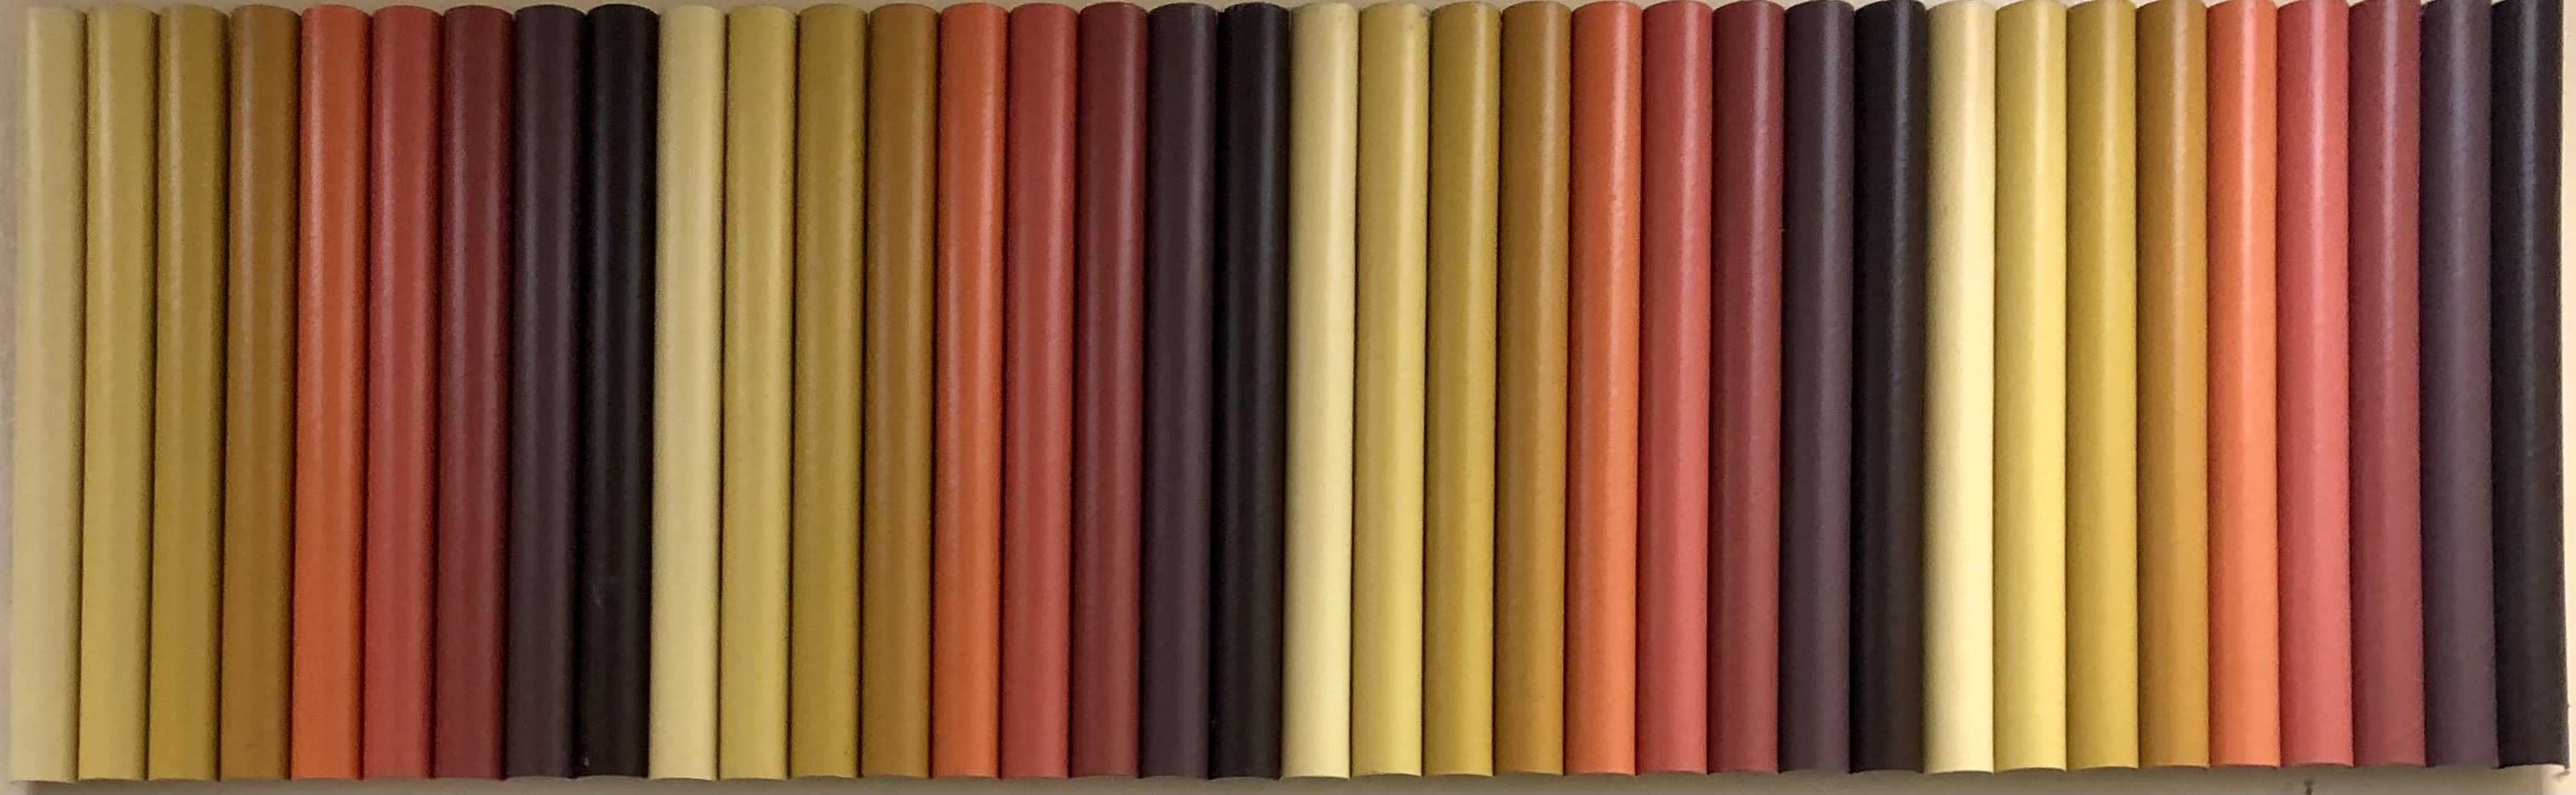 Sculpture of yellow, orange, red, and brown cardboard tubes aligned vertically. 